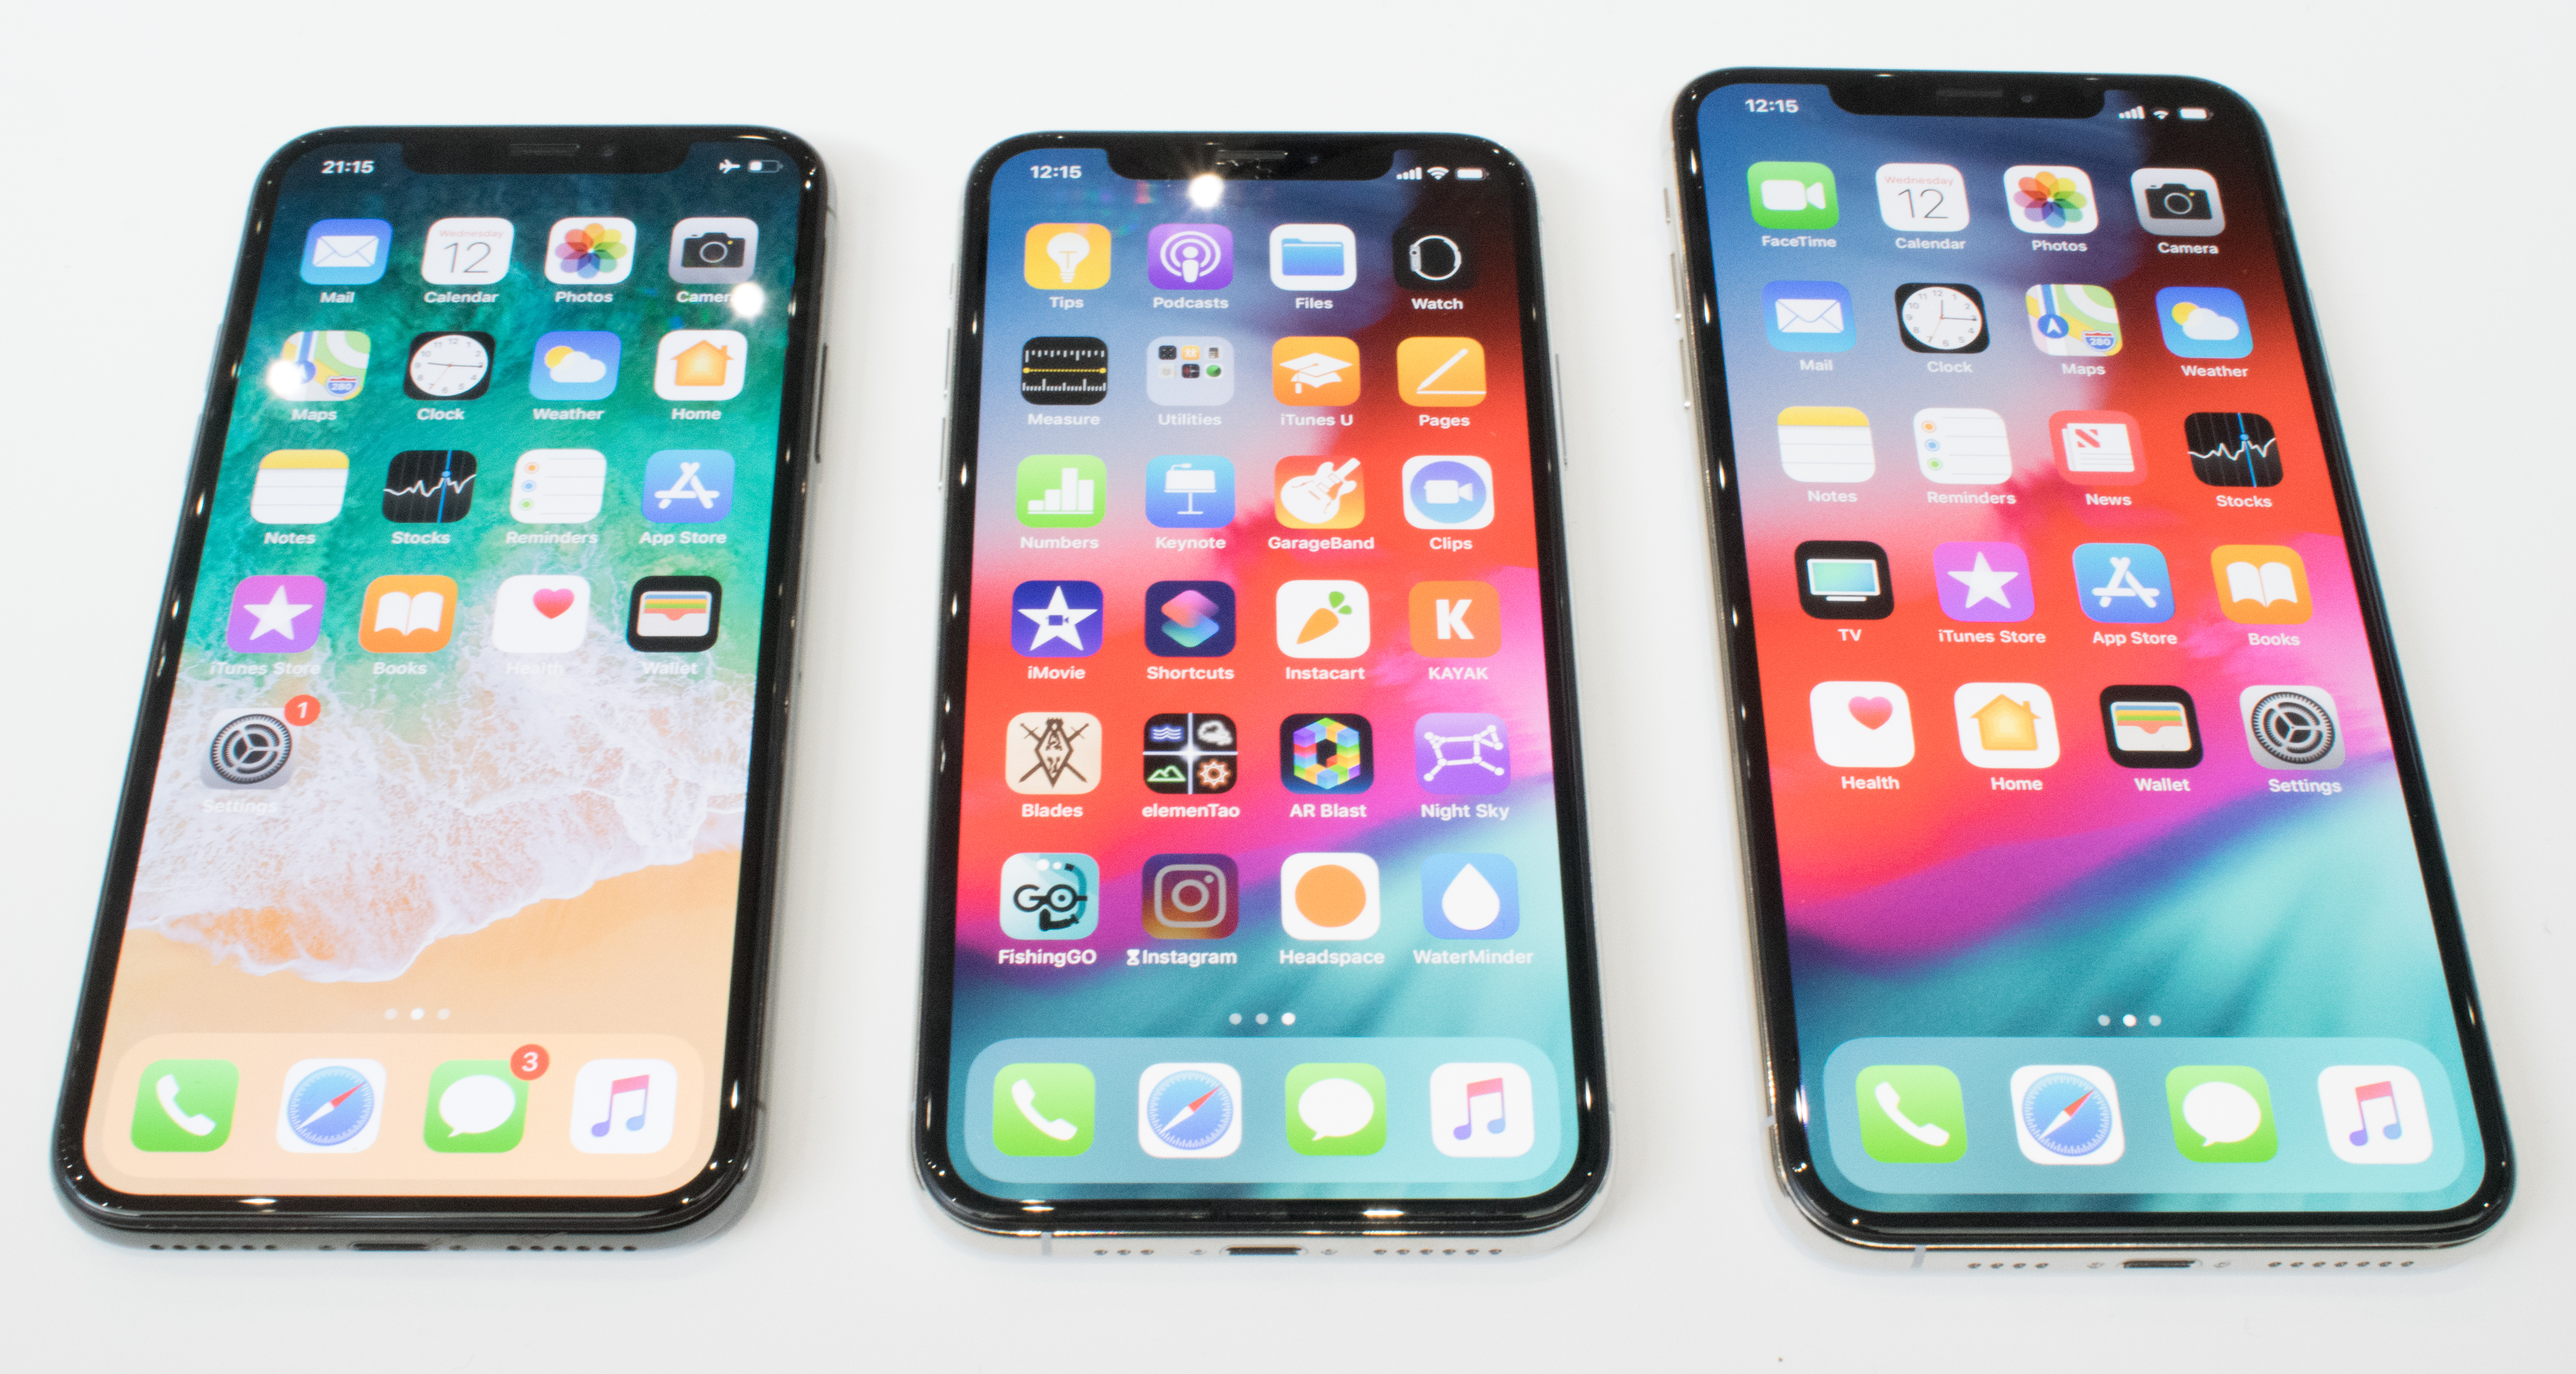 The Iphone Xs Xs Max Xr And Apple Watch 4 Hands On